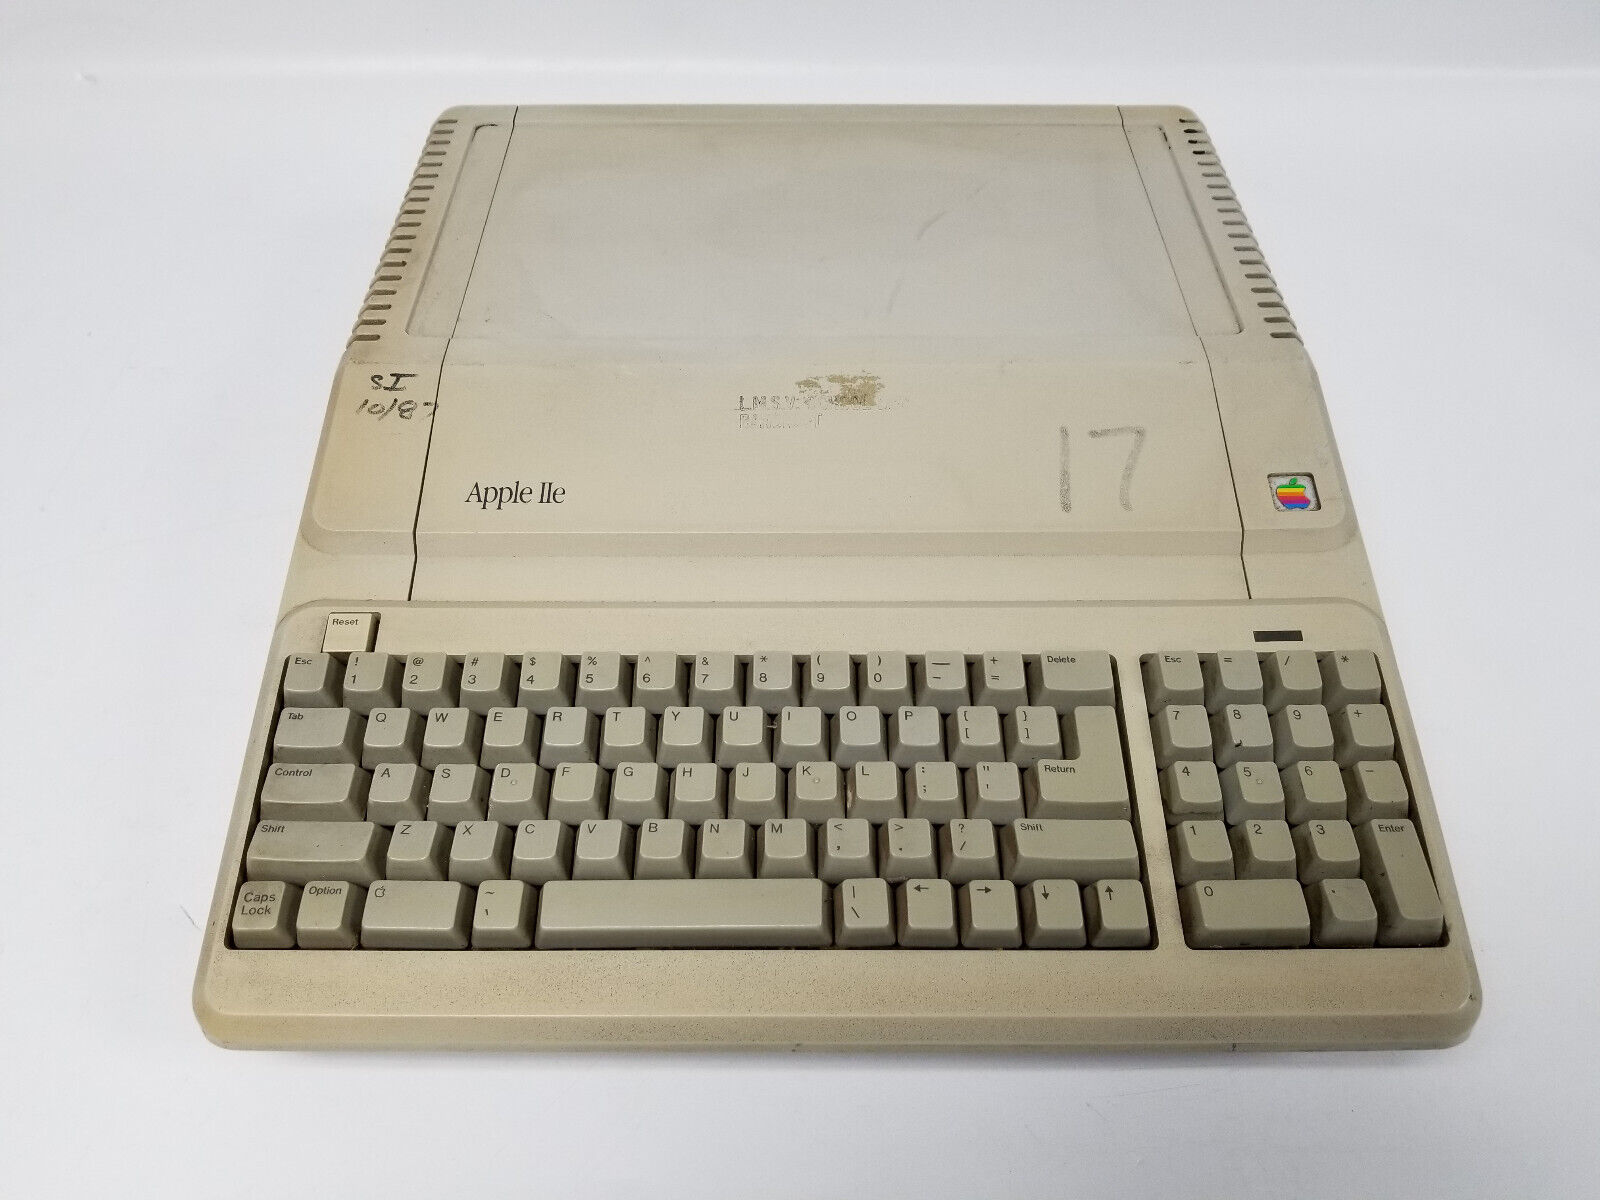 Vintage Apple IIe Computer A2S2128 (Powers On)